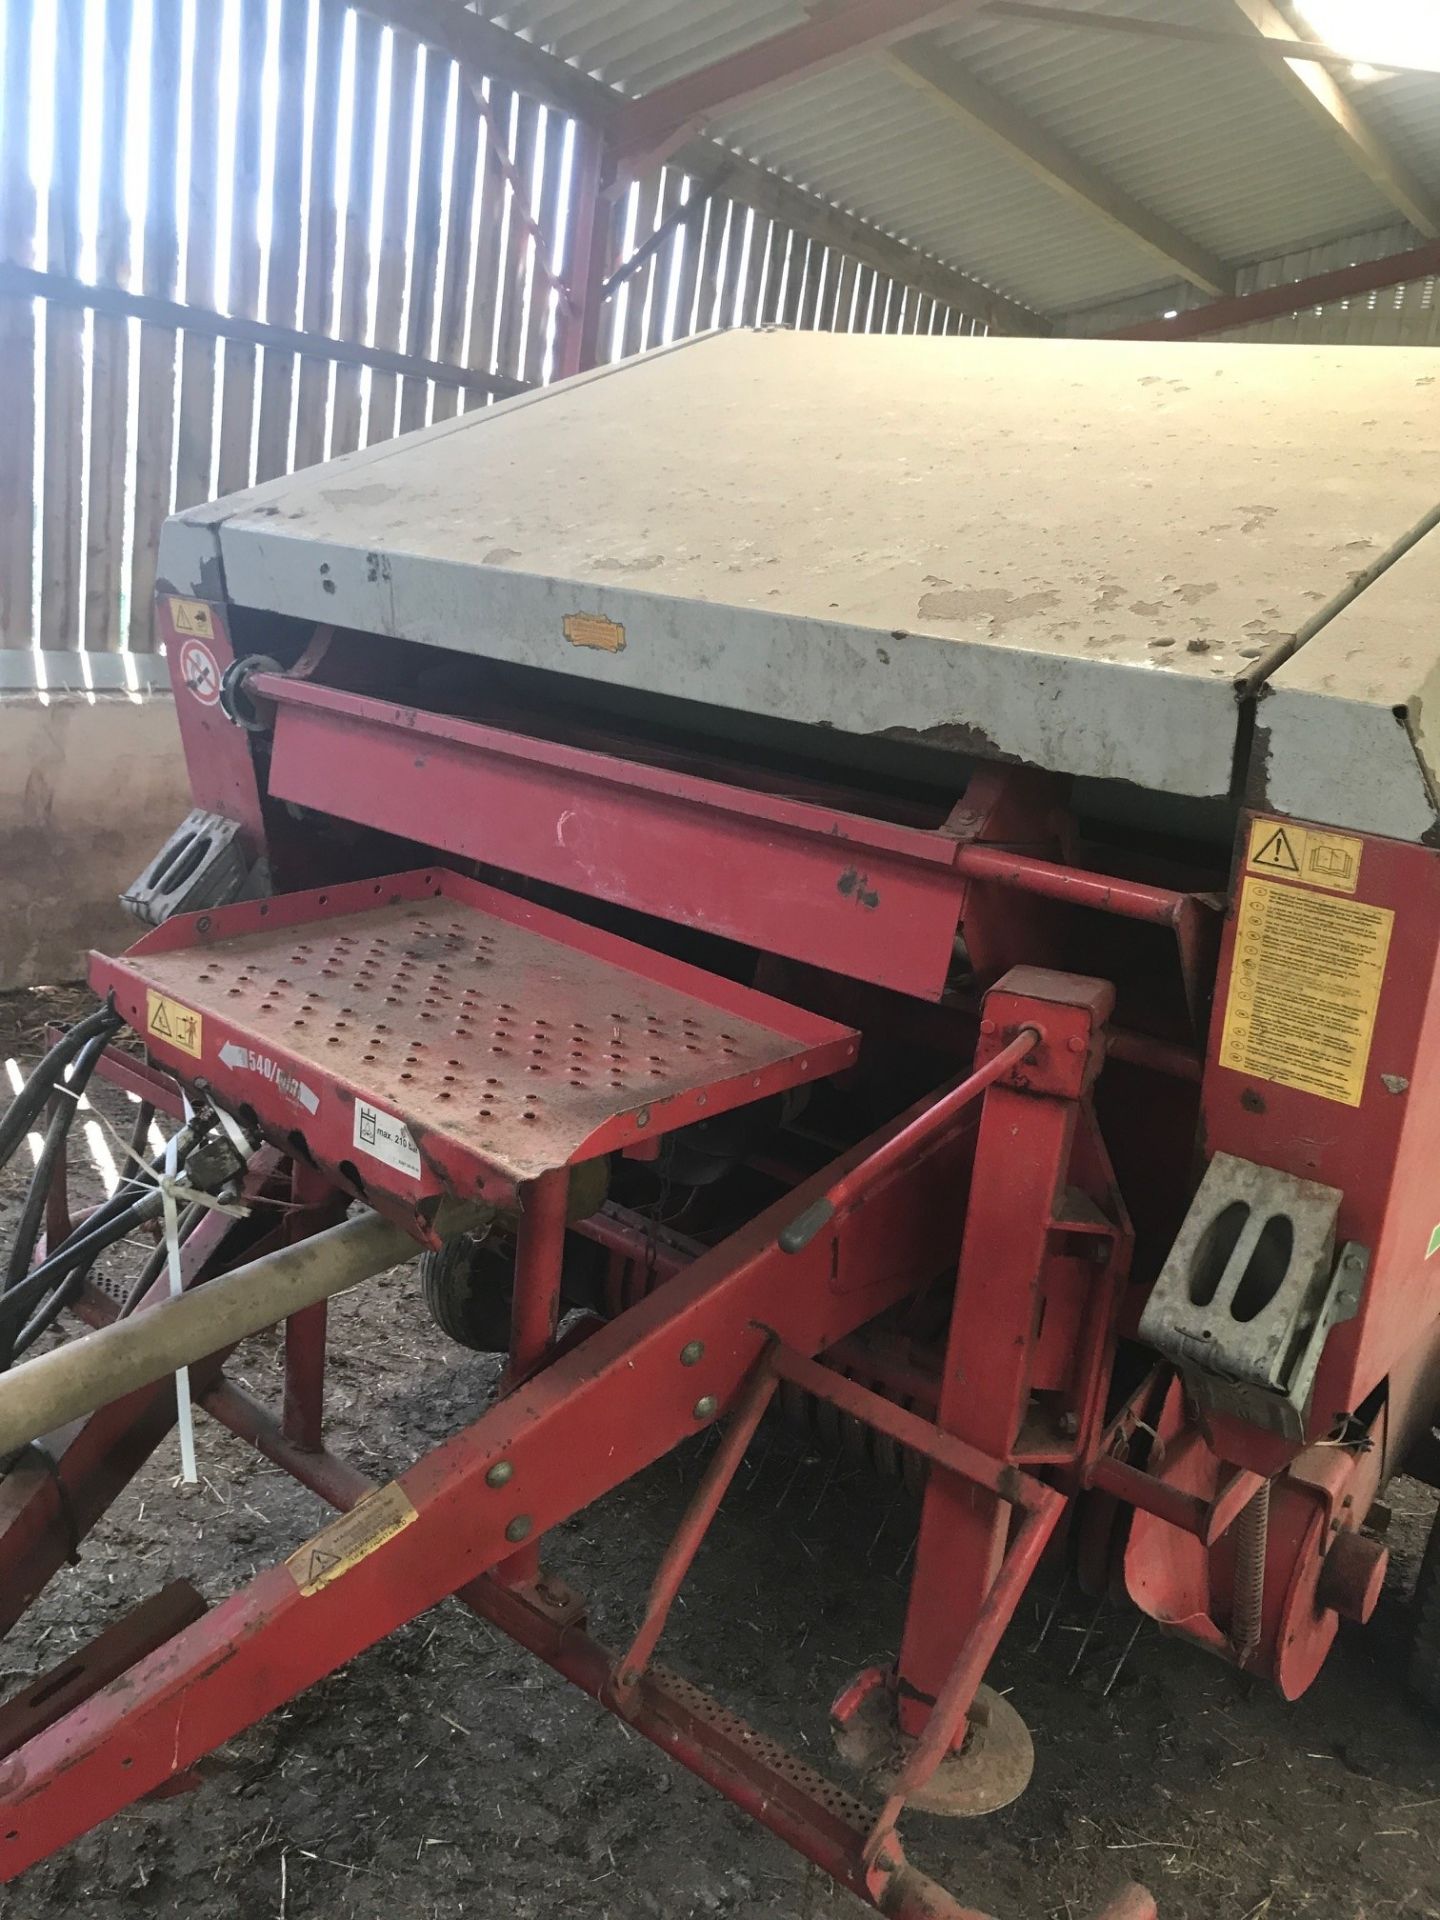 2004 WELGER 202 CLASSIC ROUND BALER - Image 3 of 10